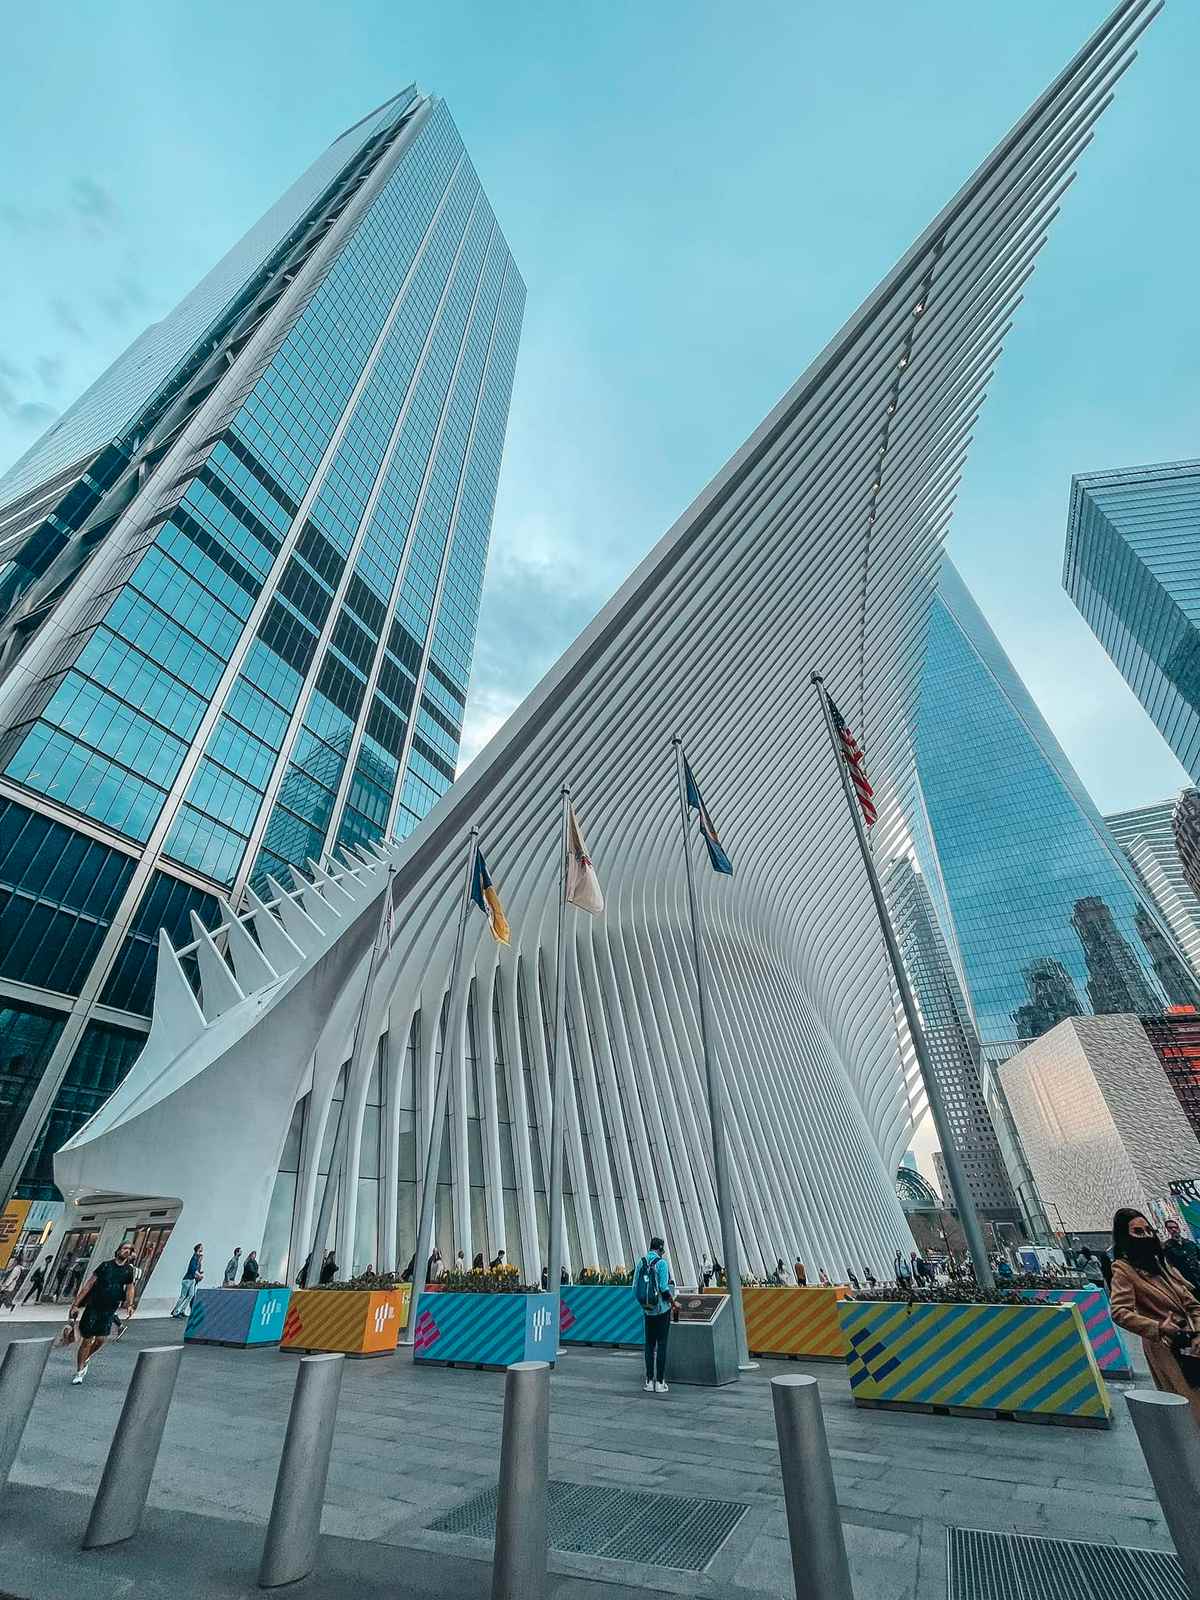 outside view of the Oculus, one of the best things to do in NYC